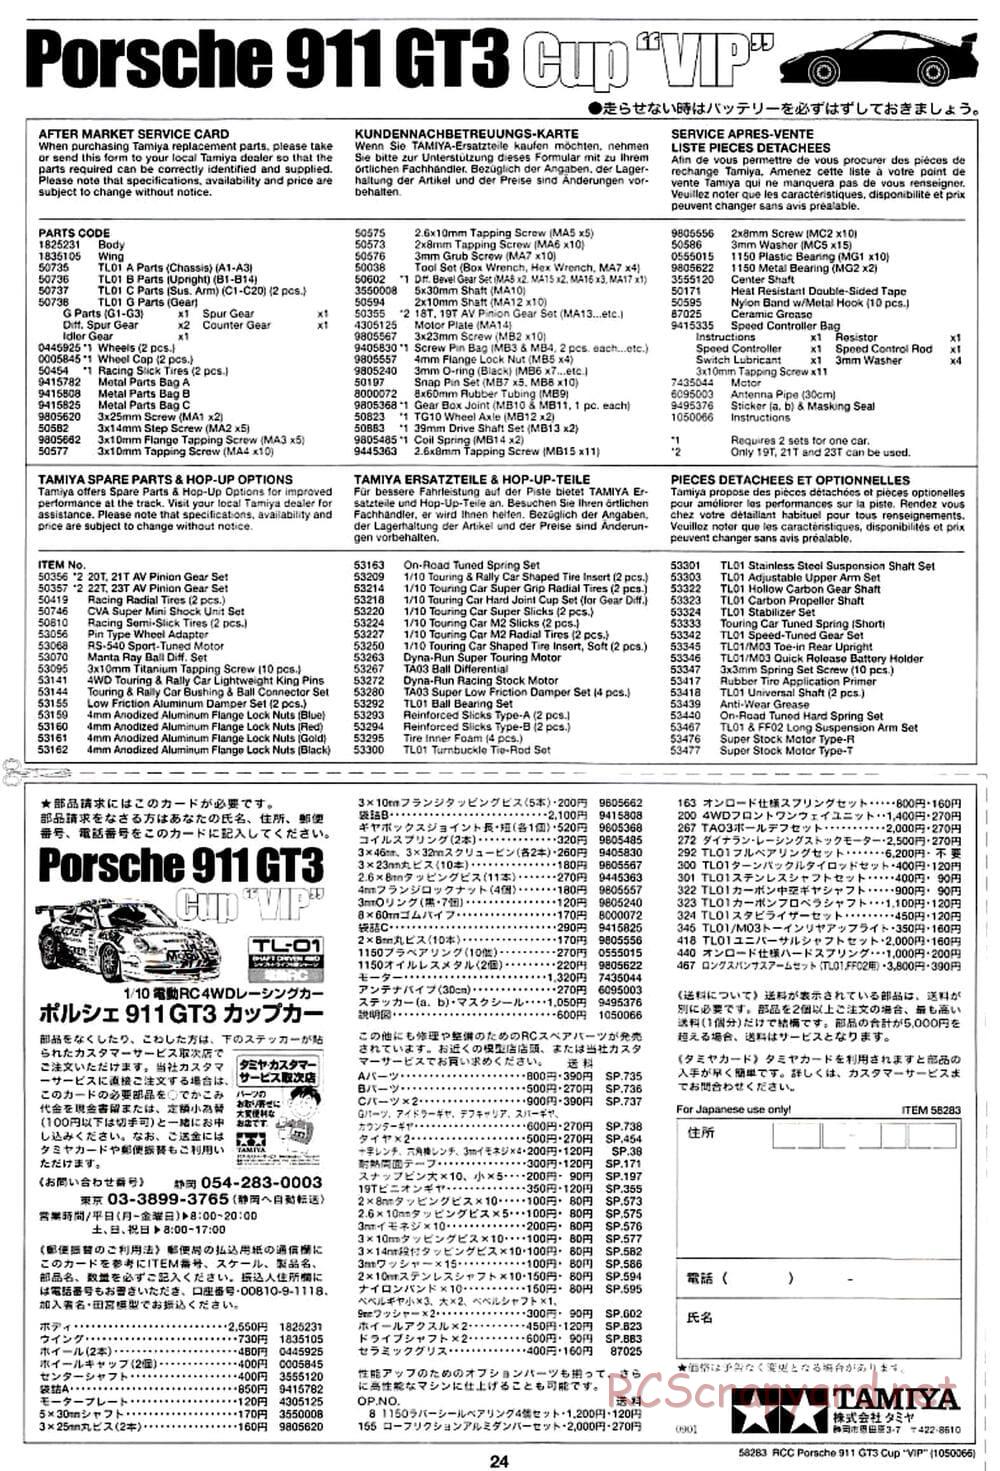 Tamiya - Porsche 911 GT3 Cup VIP - TL-01 Chassis - Manual - Page 24